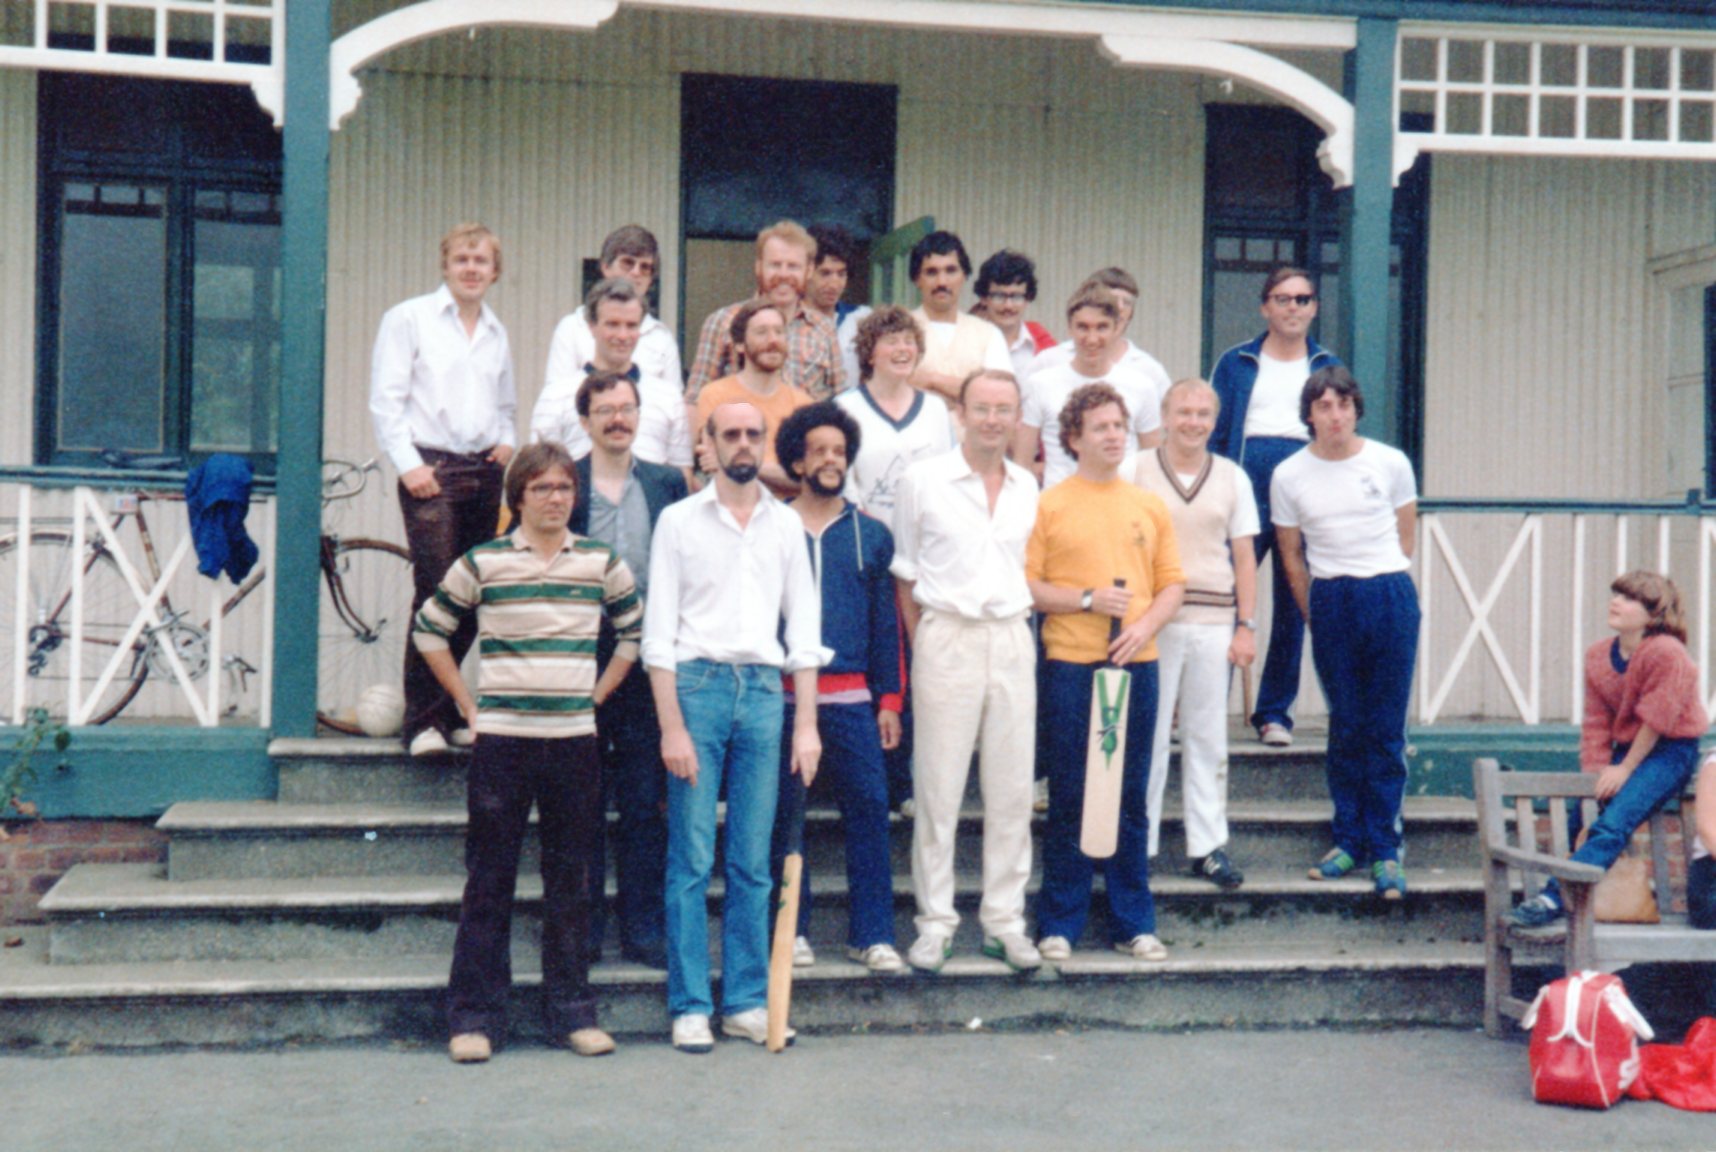 An old photograph of a group of people standing outside a cricket pavilion